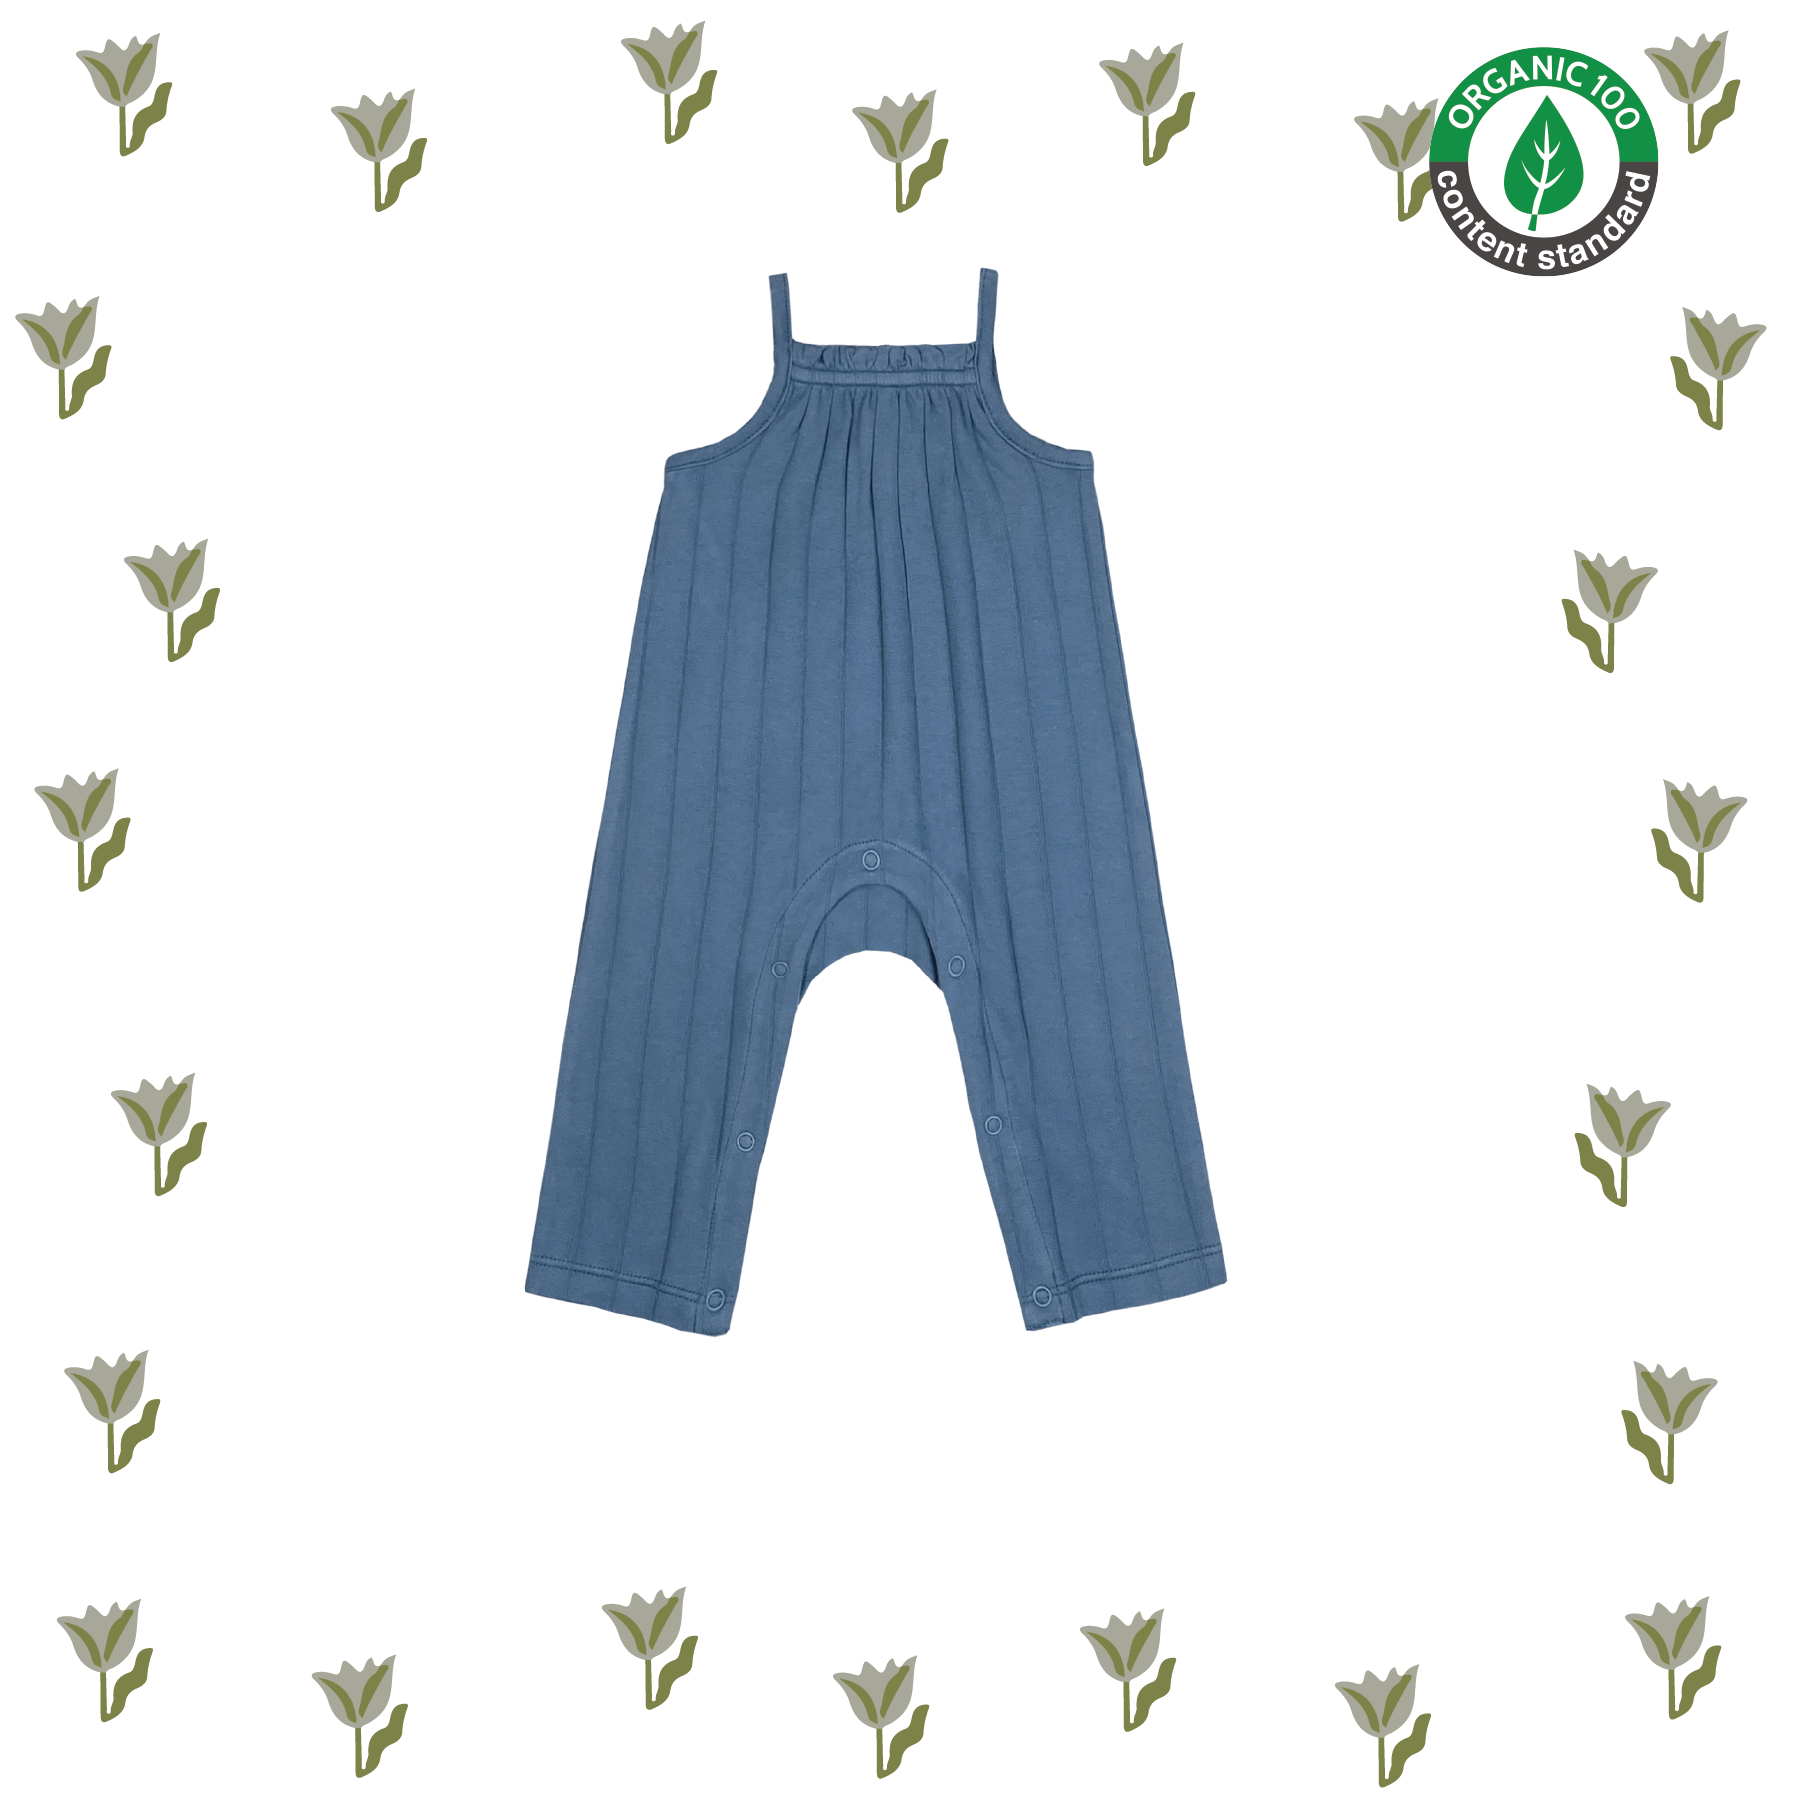 Blue Velvet Cheesecake Romper from Little BB Love - Stylish and Comfortably Soft Baby Clothing Store